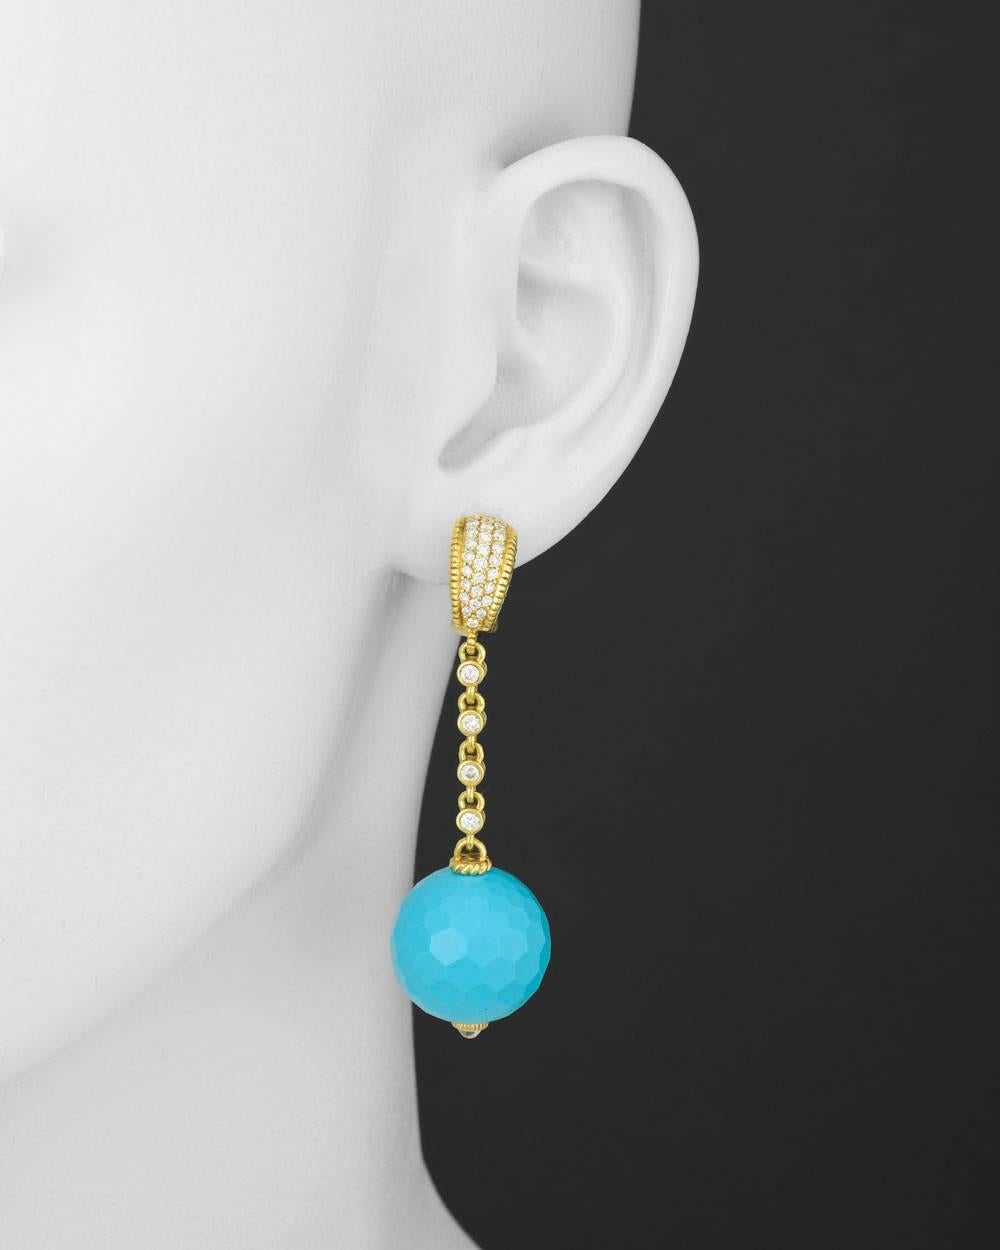 Large turquoise bead drop earrings in 18k yellow gold, accented by near-colorless, round brilliant cut diamonds. Diamonds weighing 1.00 total carats. Post with clip backs. Designed by Judith Ripka. Just under 2.5